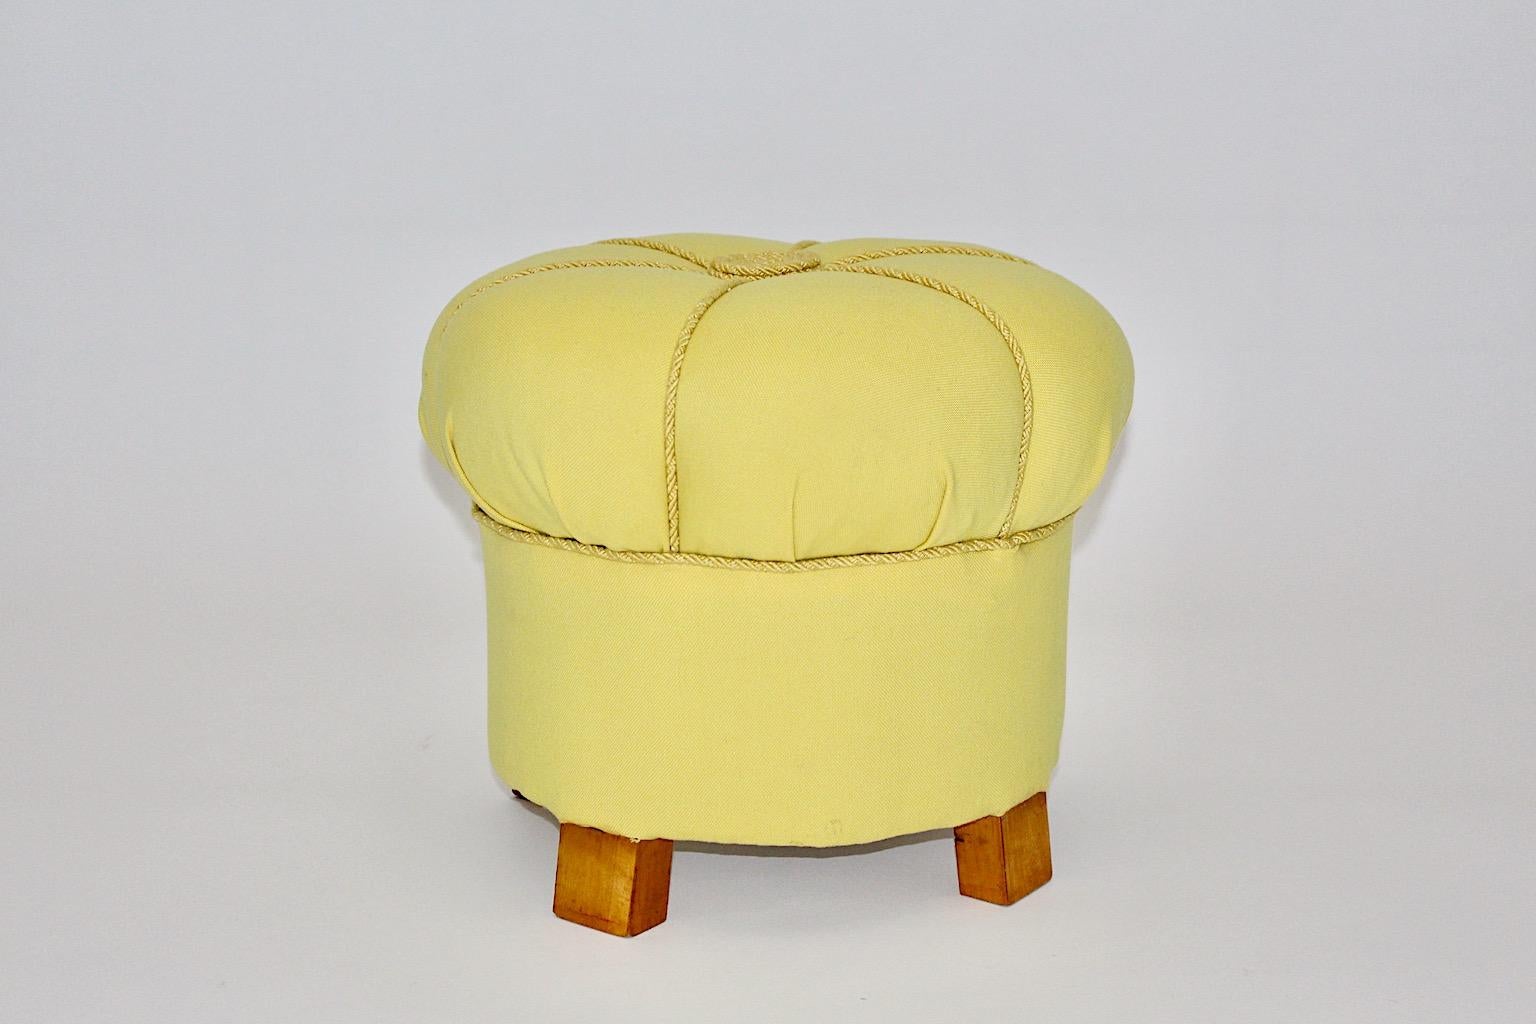 Fabric Yellow Art Deco Cherry Stool or Pouf, Austria, 1930s For Sale